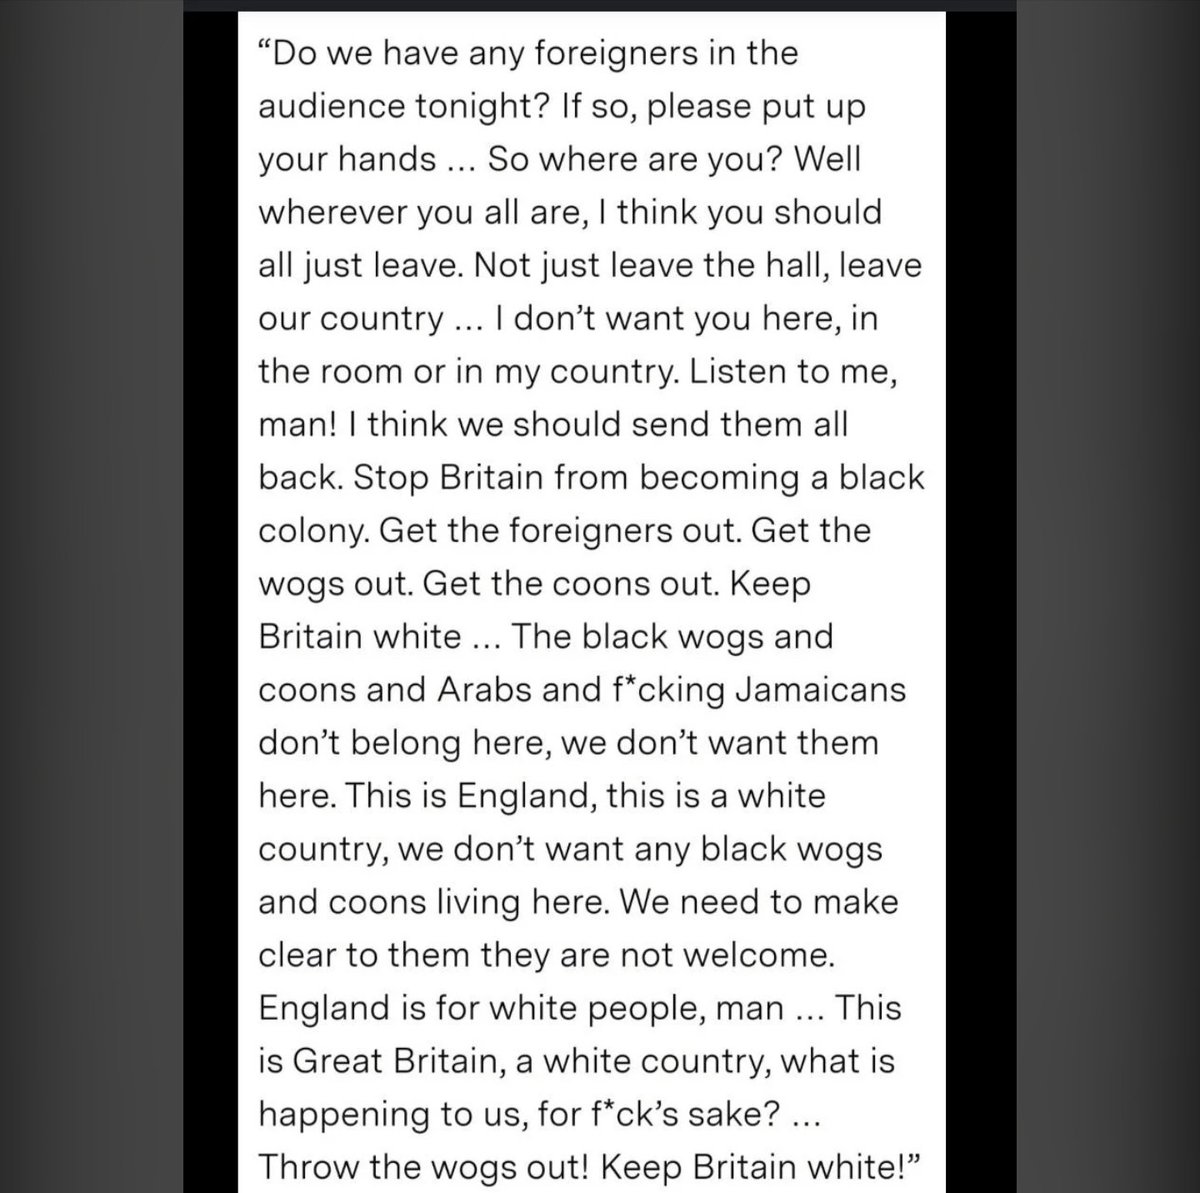 I see @EricClapton is touring again, so it seems timely to remind you he is a vile, far-right racist who previously supported Enoch Powell. For those who don't know, below is his rabidly racist rant from 1976. I strongly advocate people boycott his tour, music and other ventures.